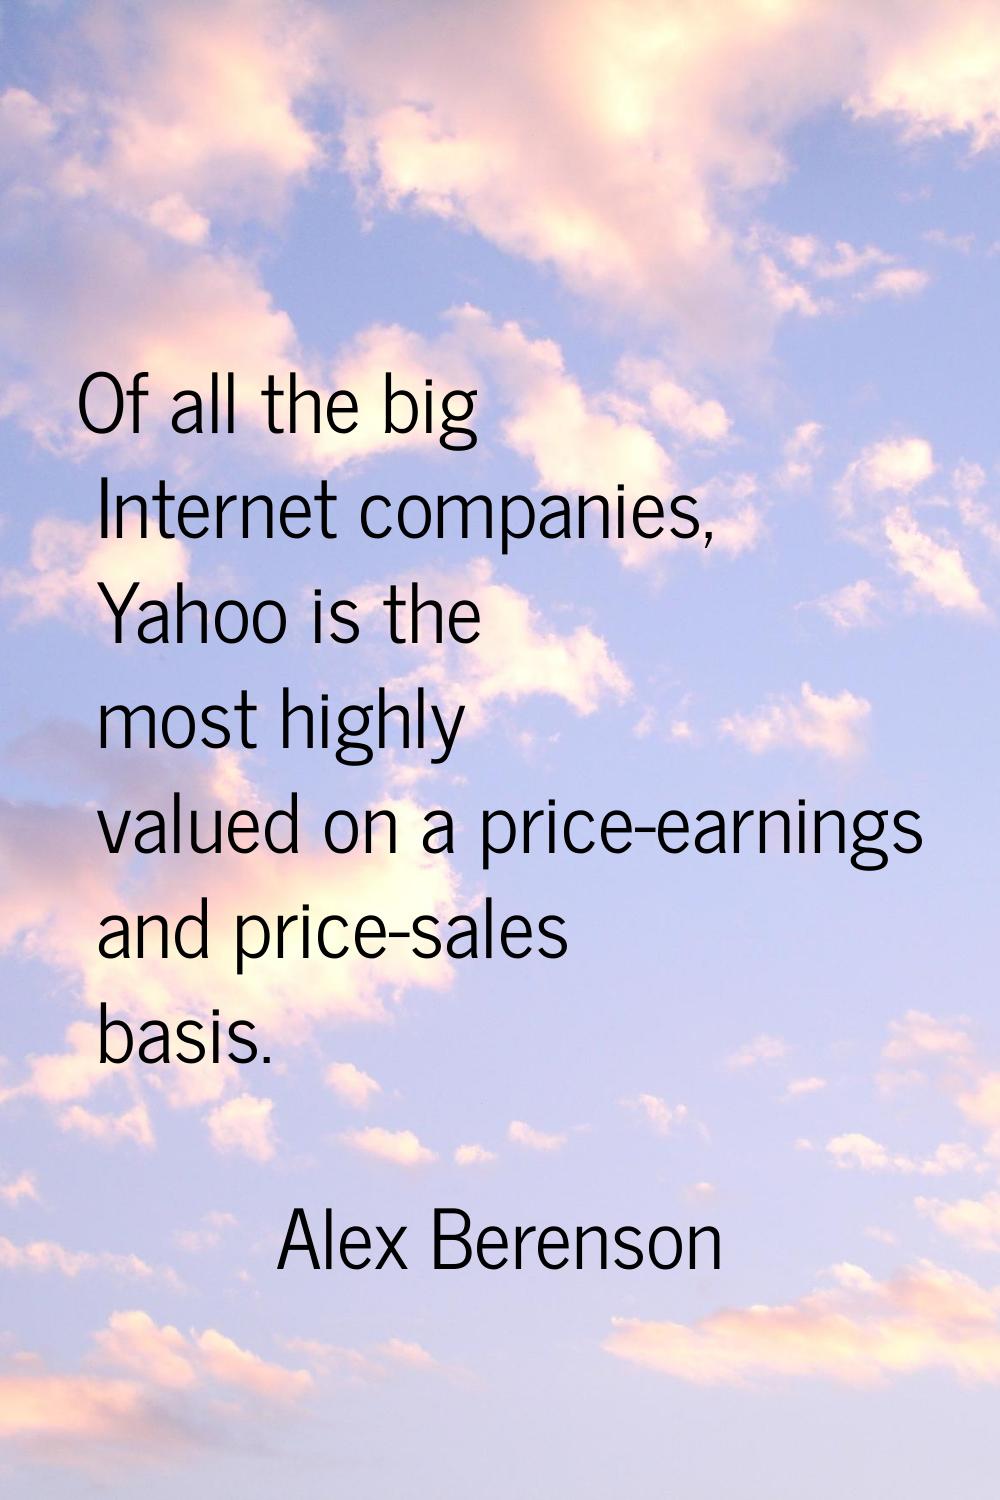 Of all the big Internet companies, Yahoo is the most highly valued on a price-earnings and price-sa